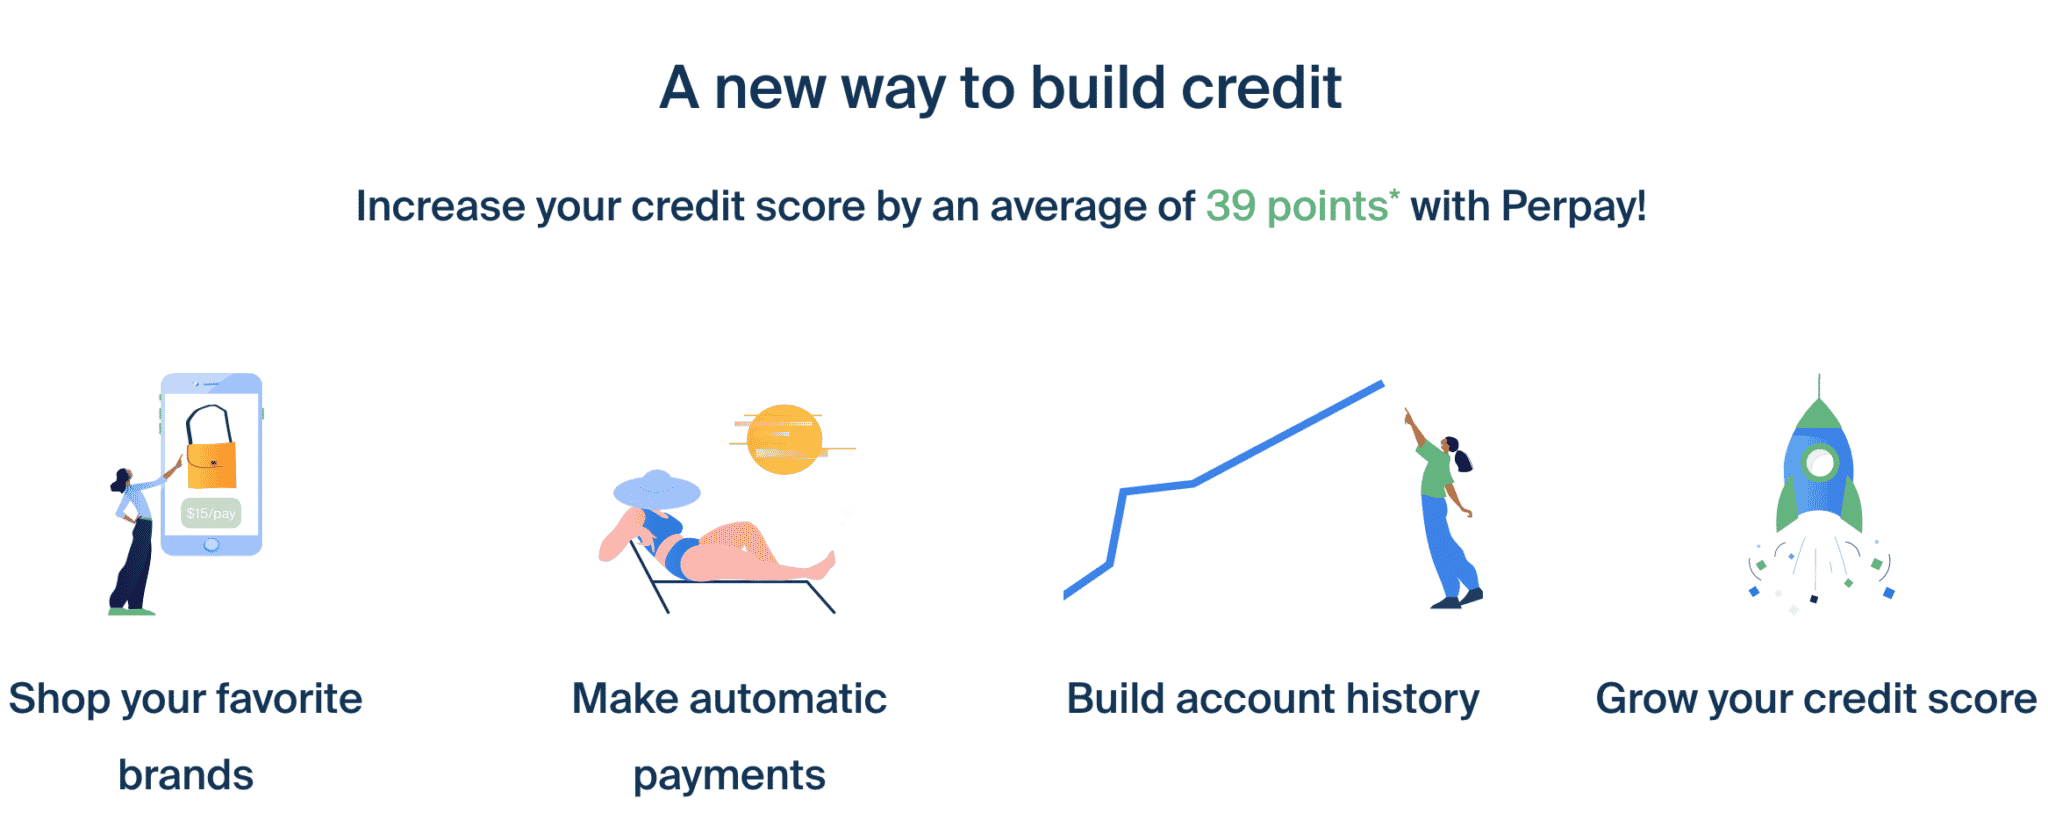 perpay review: screenshot on how to build credit